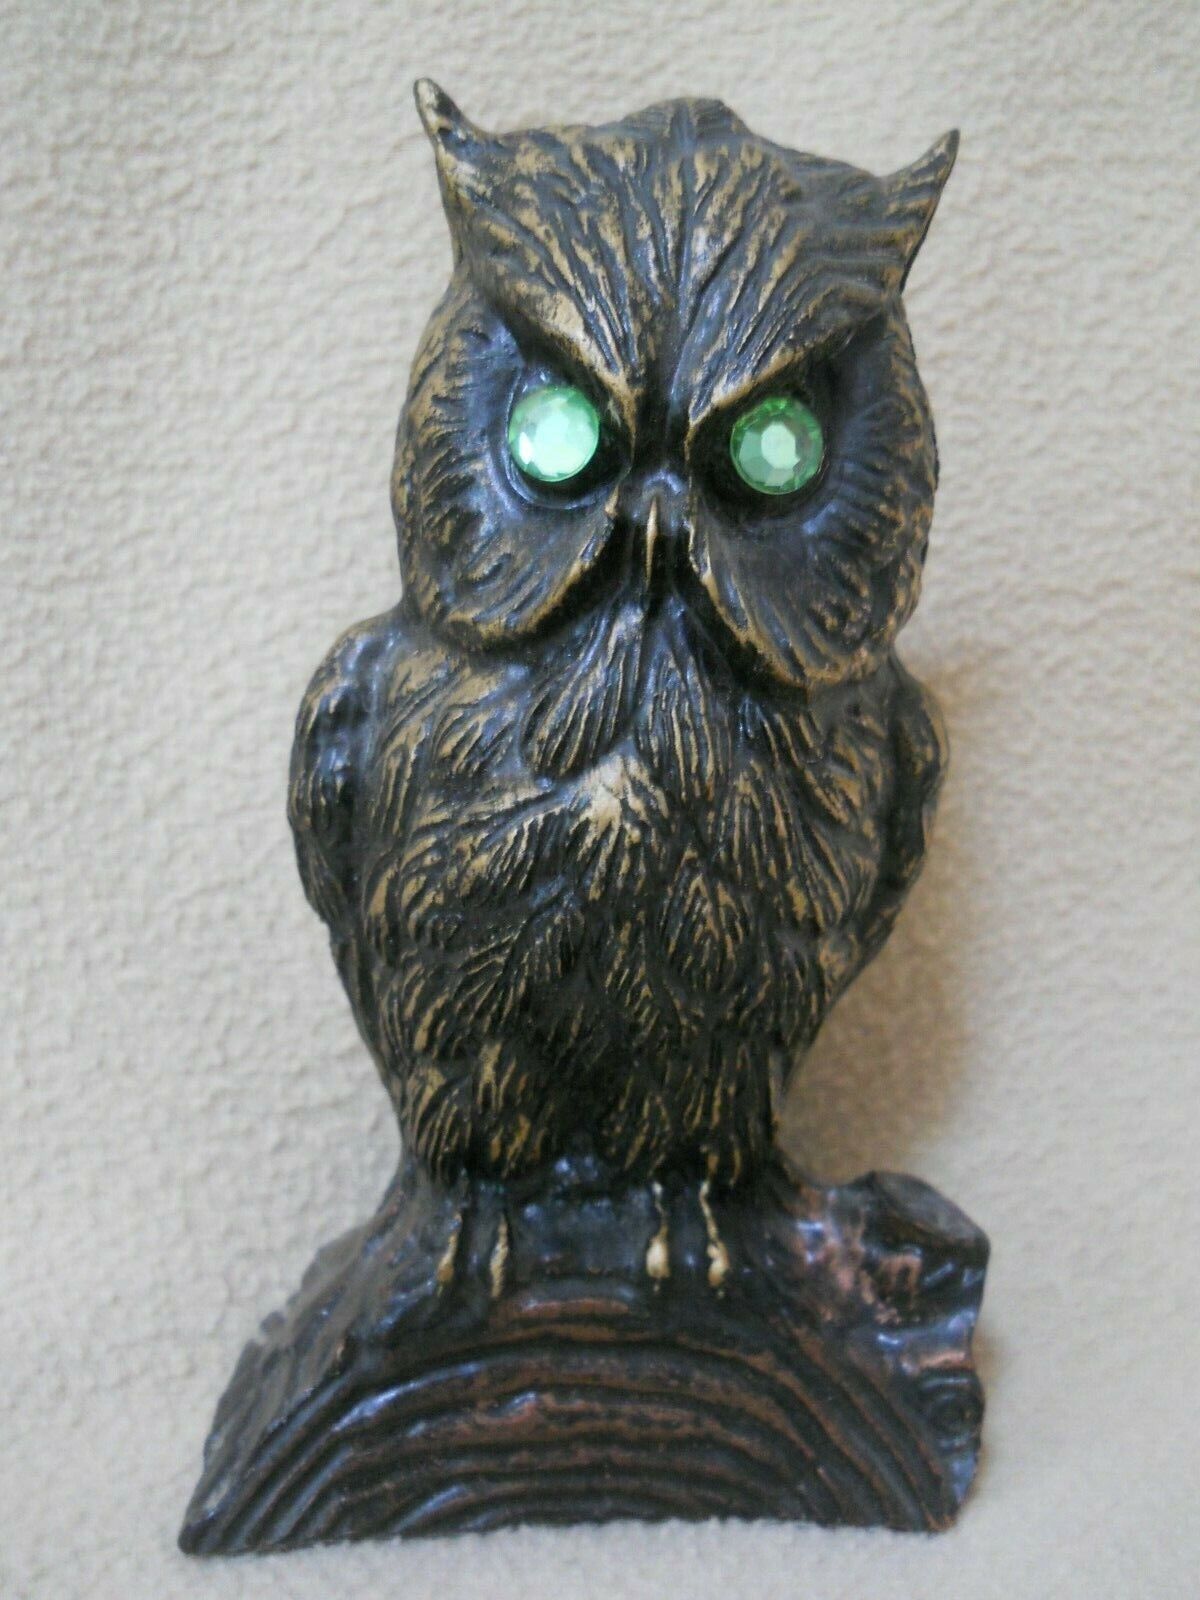 Vintage 1980 Handcrafted Coal Figurine Black & Gold Owl with Green Eyes